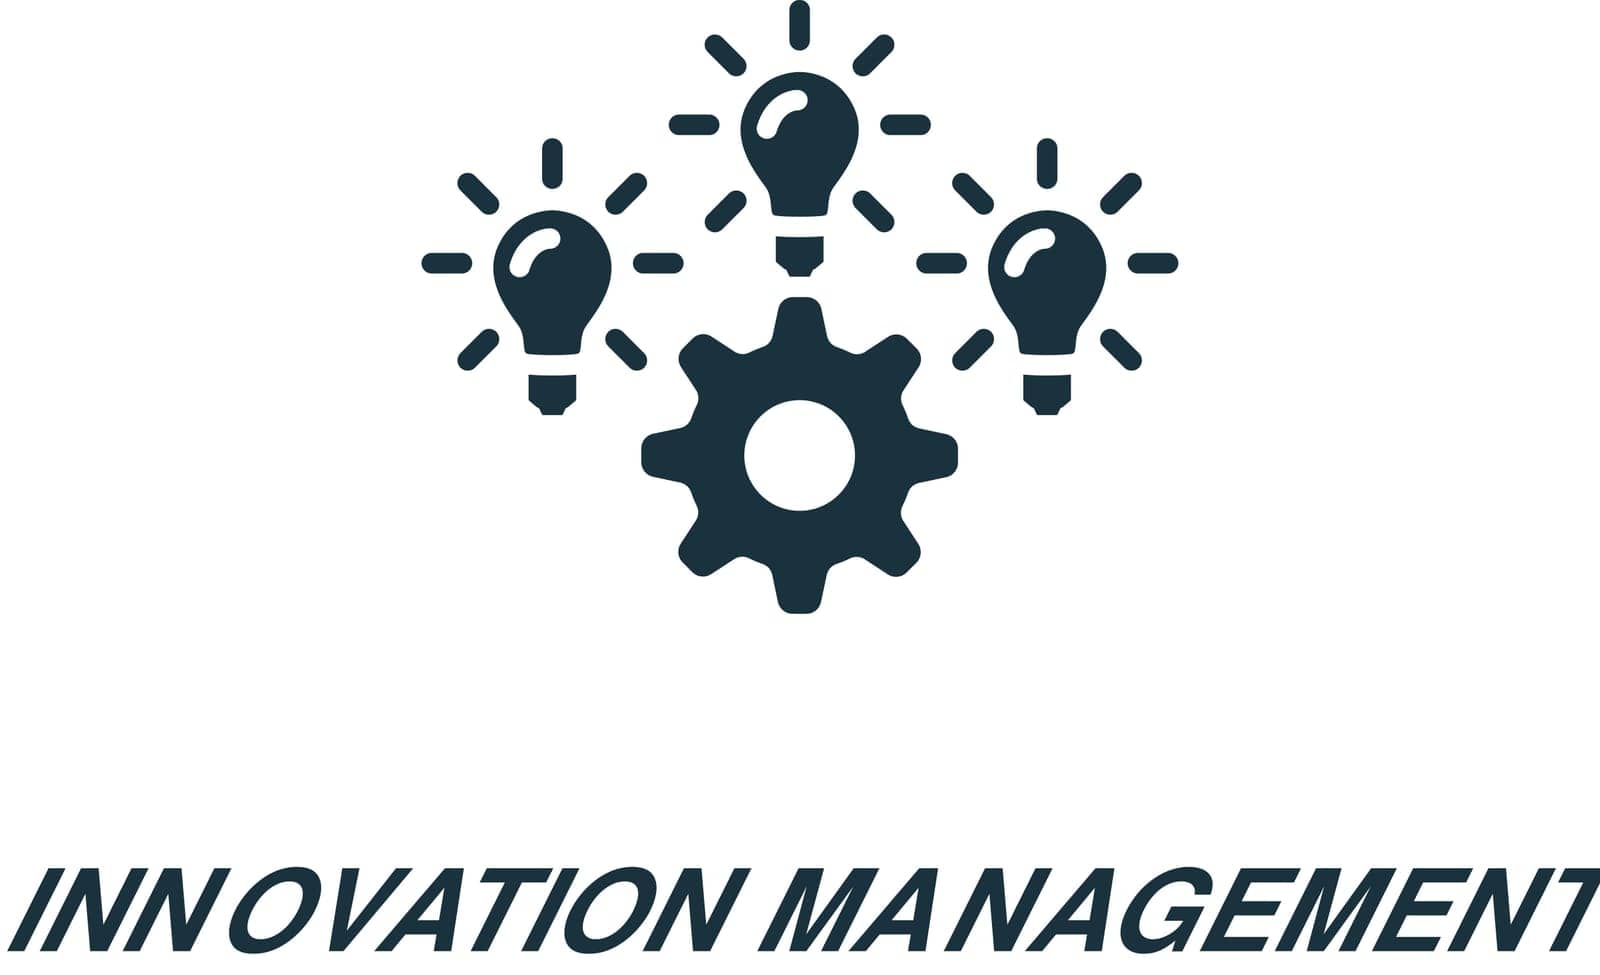 Innovation management icon. Monochrome simple sign from business concept collection. Innovation management icon for logo, templates, web design and infographics